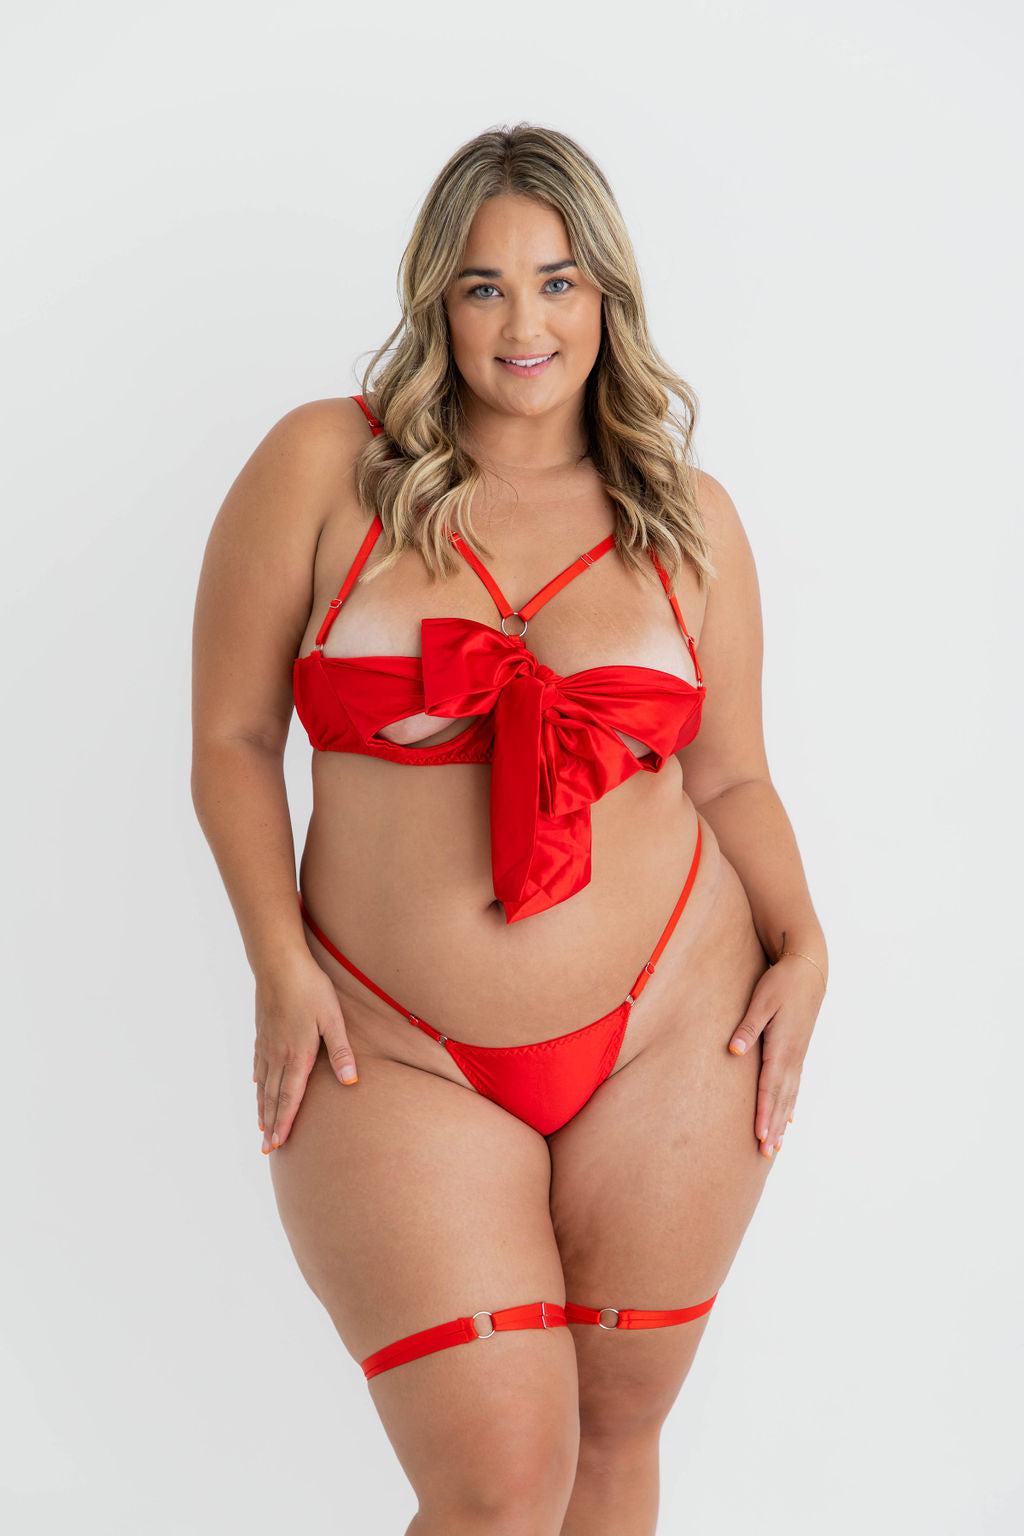 The Gift Bow Lingerie Set Red - $64.00 - Costumes - Naked Curve